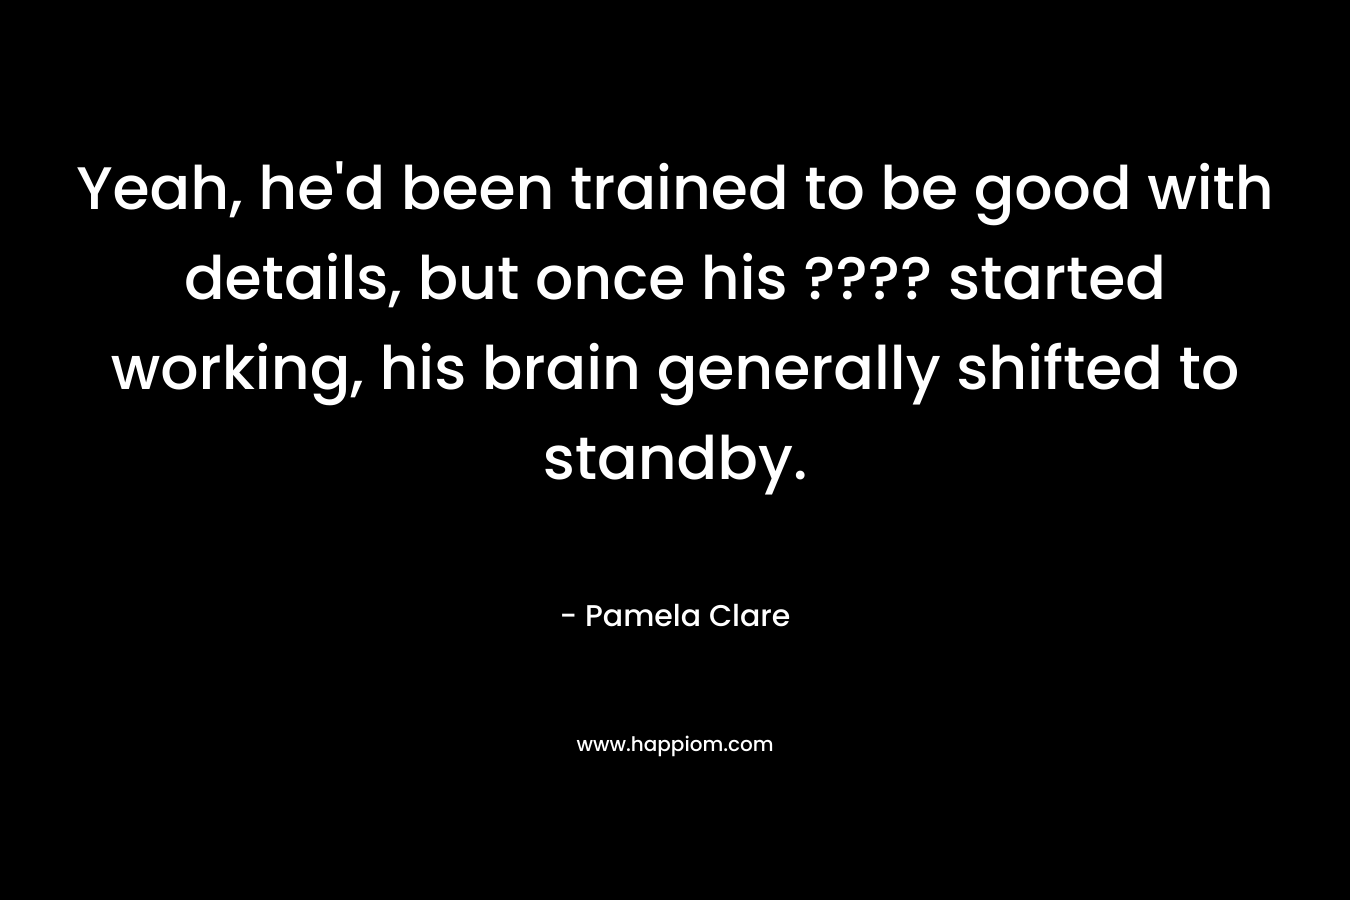 Yeah, he’d been trained to be good with details, but once his ???? started working, his brain generally shifted to standby. – Pamela Clare